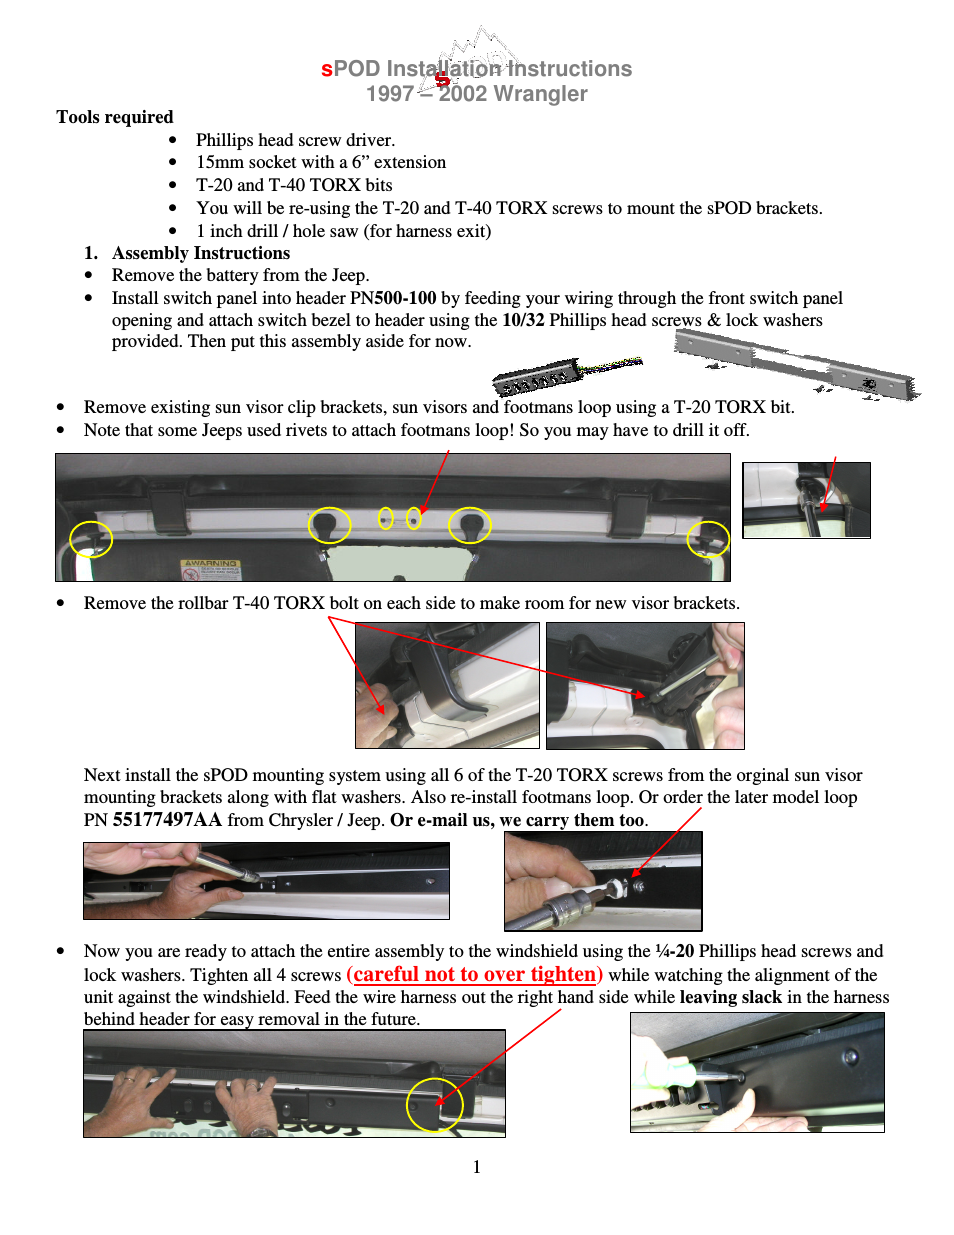 TJ 1997-2002 Instructions over battery